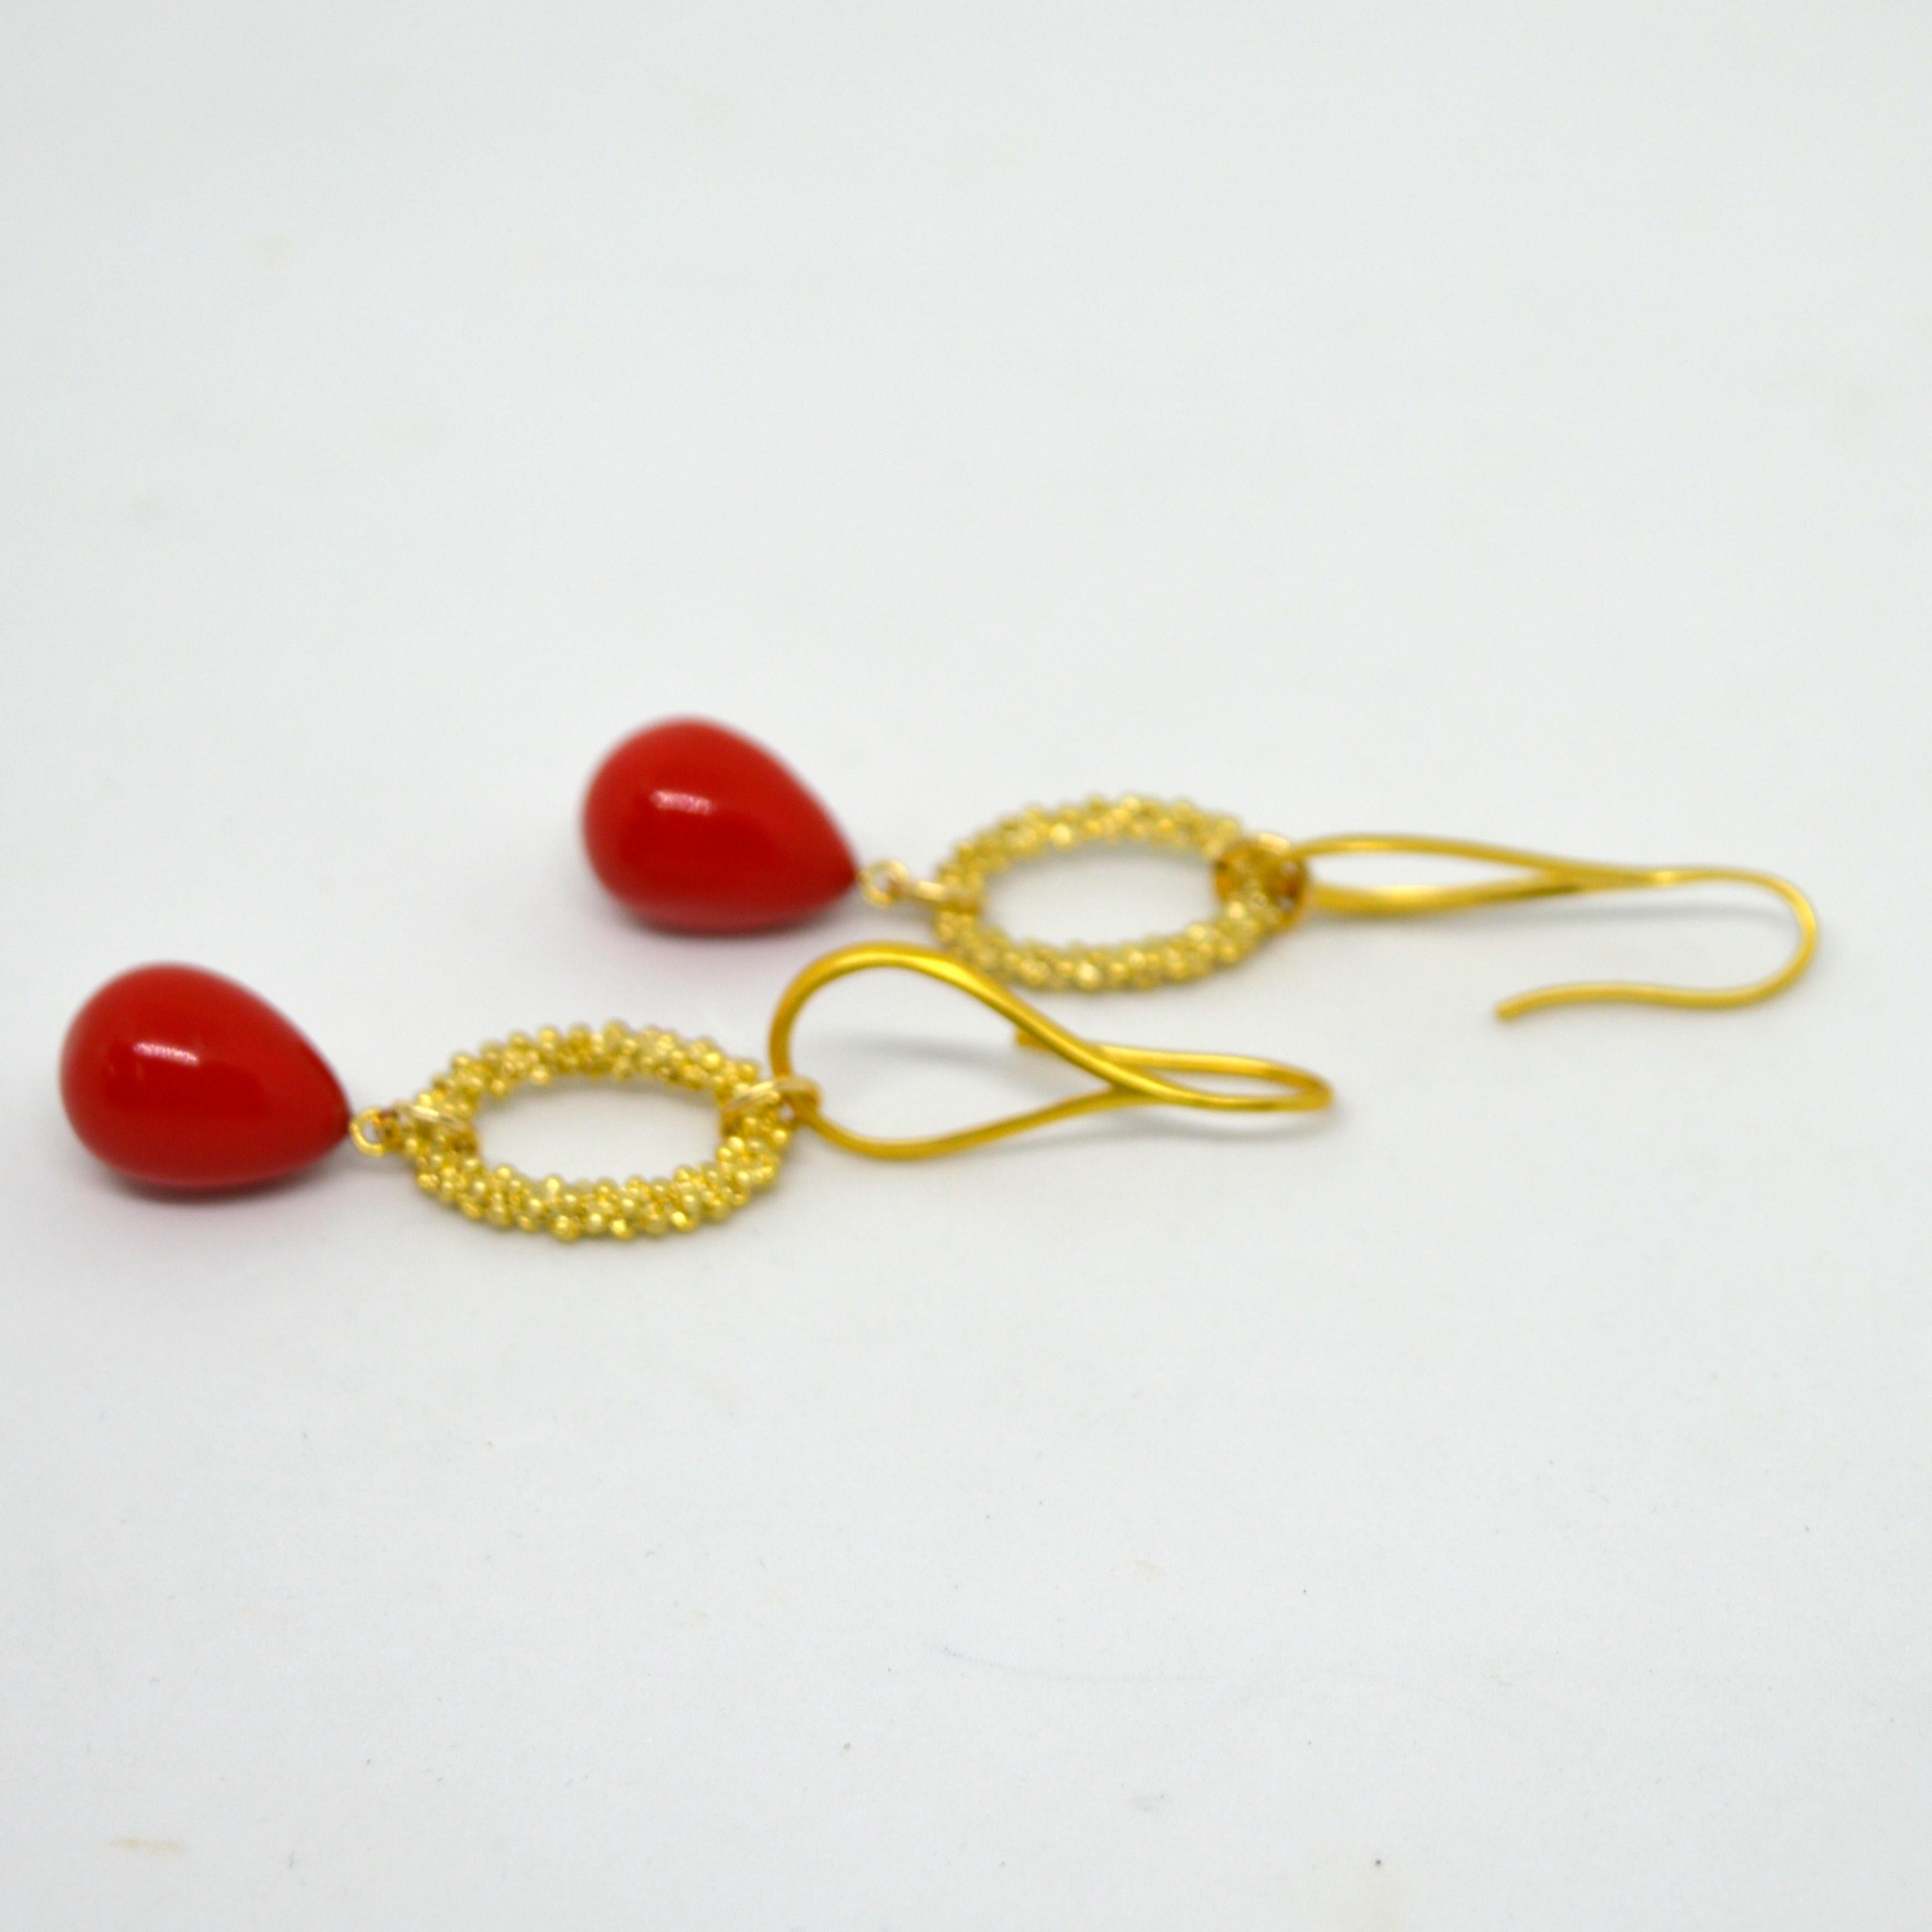 Bead Decadent Jewels Shell Based Pearl Red Briolette Gold Earrings For Sale